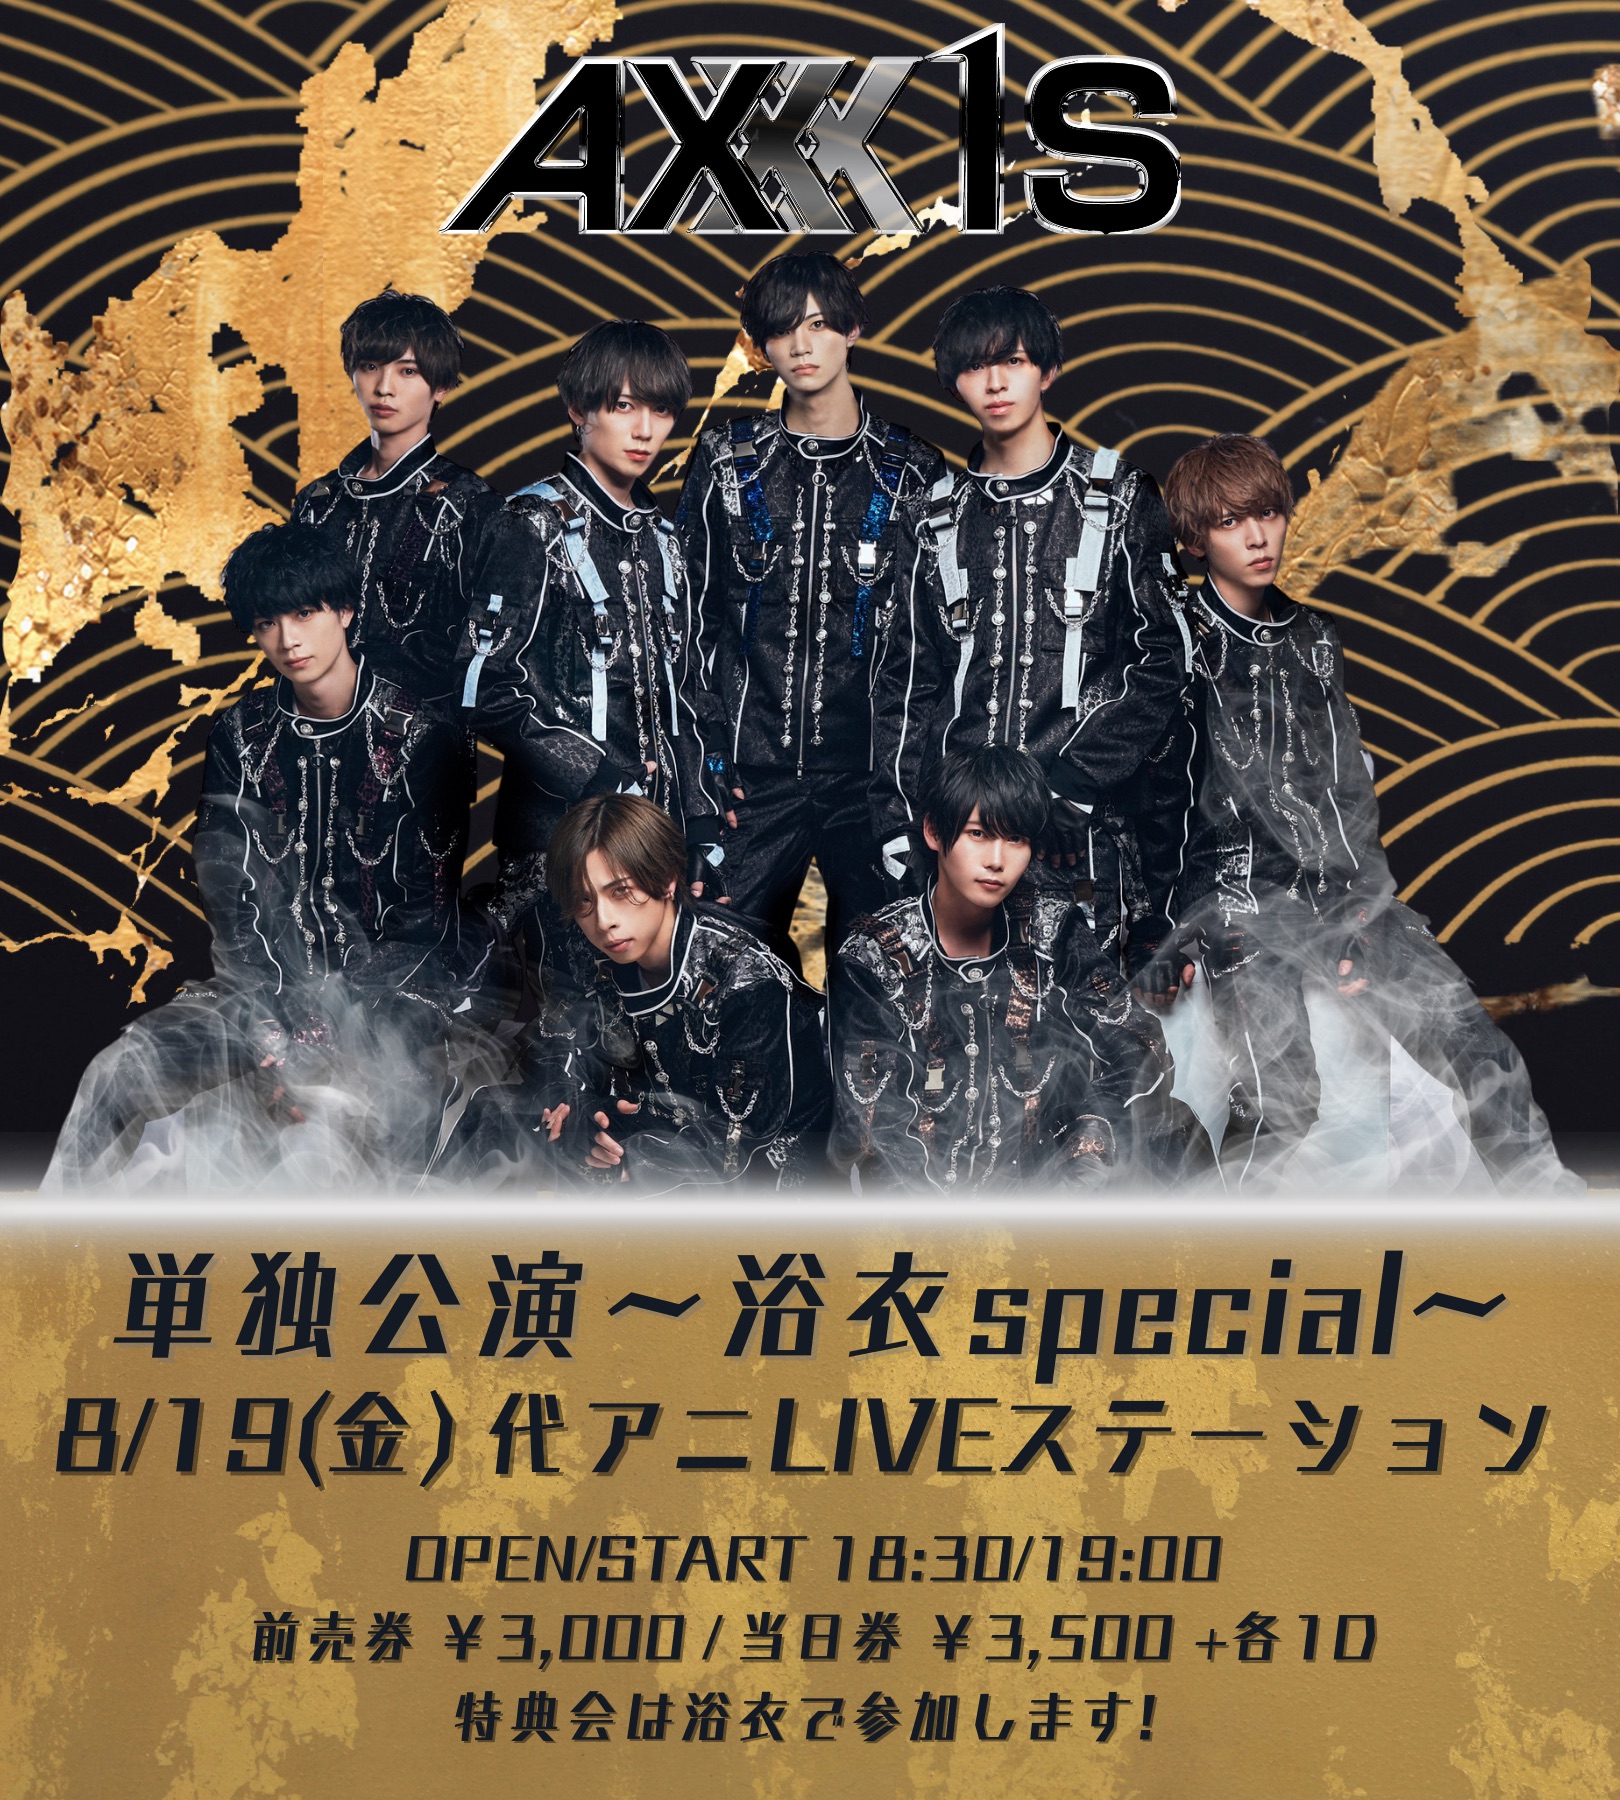 AXXX1S 8/19  単独公演~浴衣special~＠代アニLIVEステーション